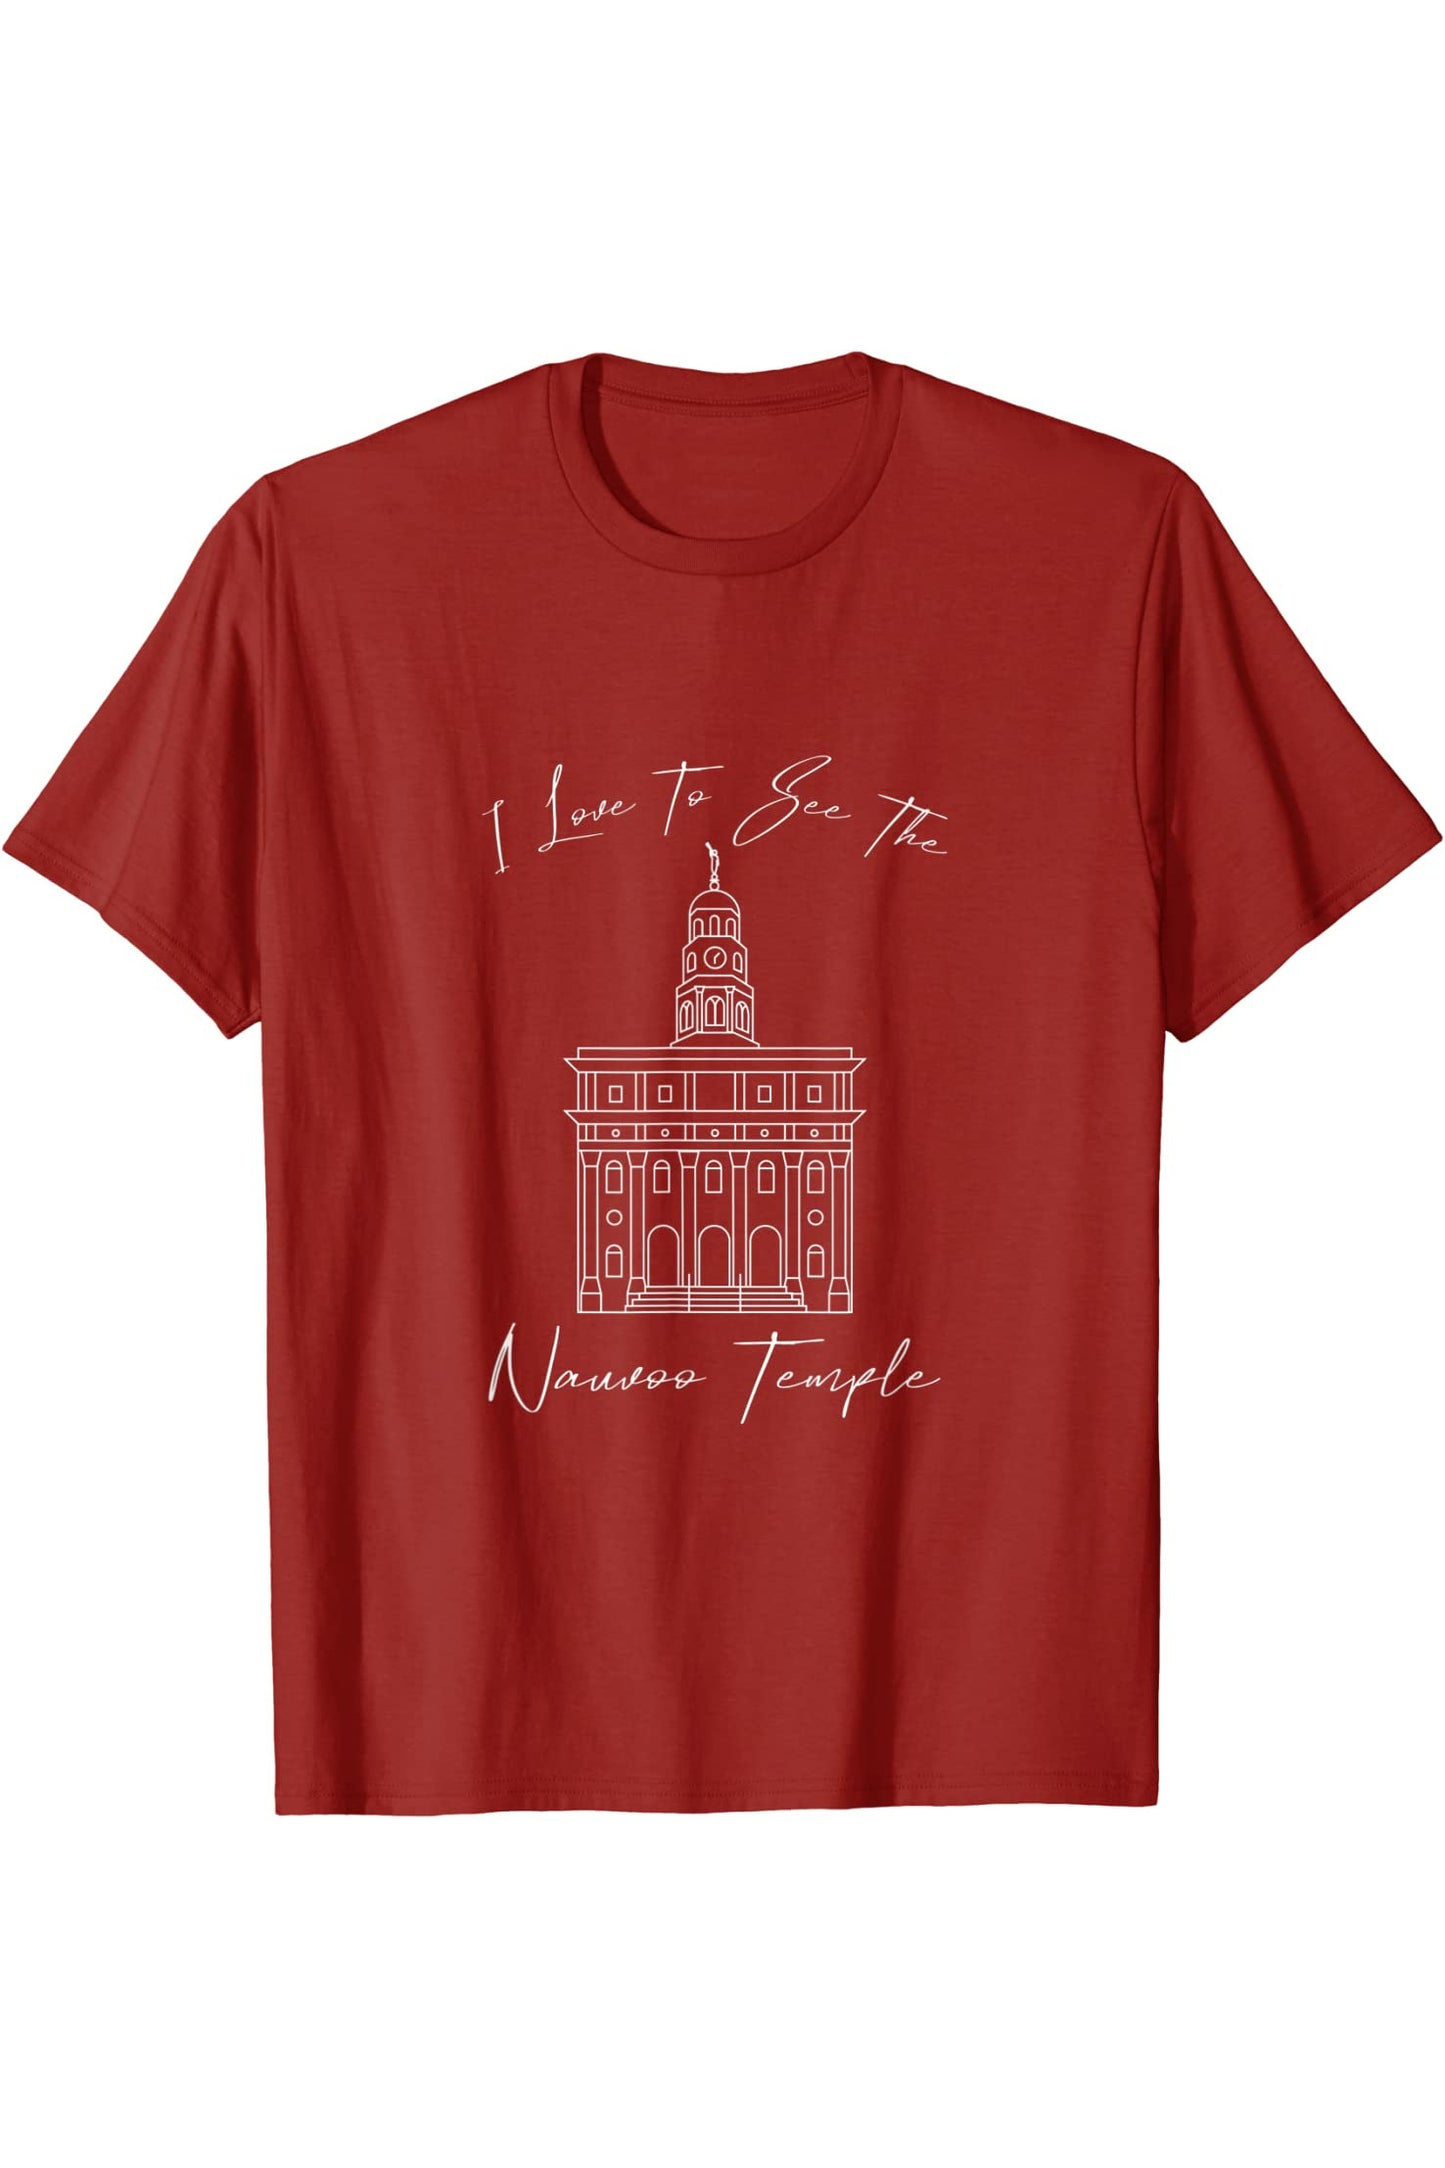 Nauvoo IL Tempel, I love to see my temple, calligraphy T-Shirt